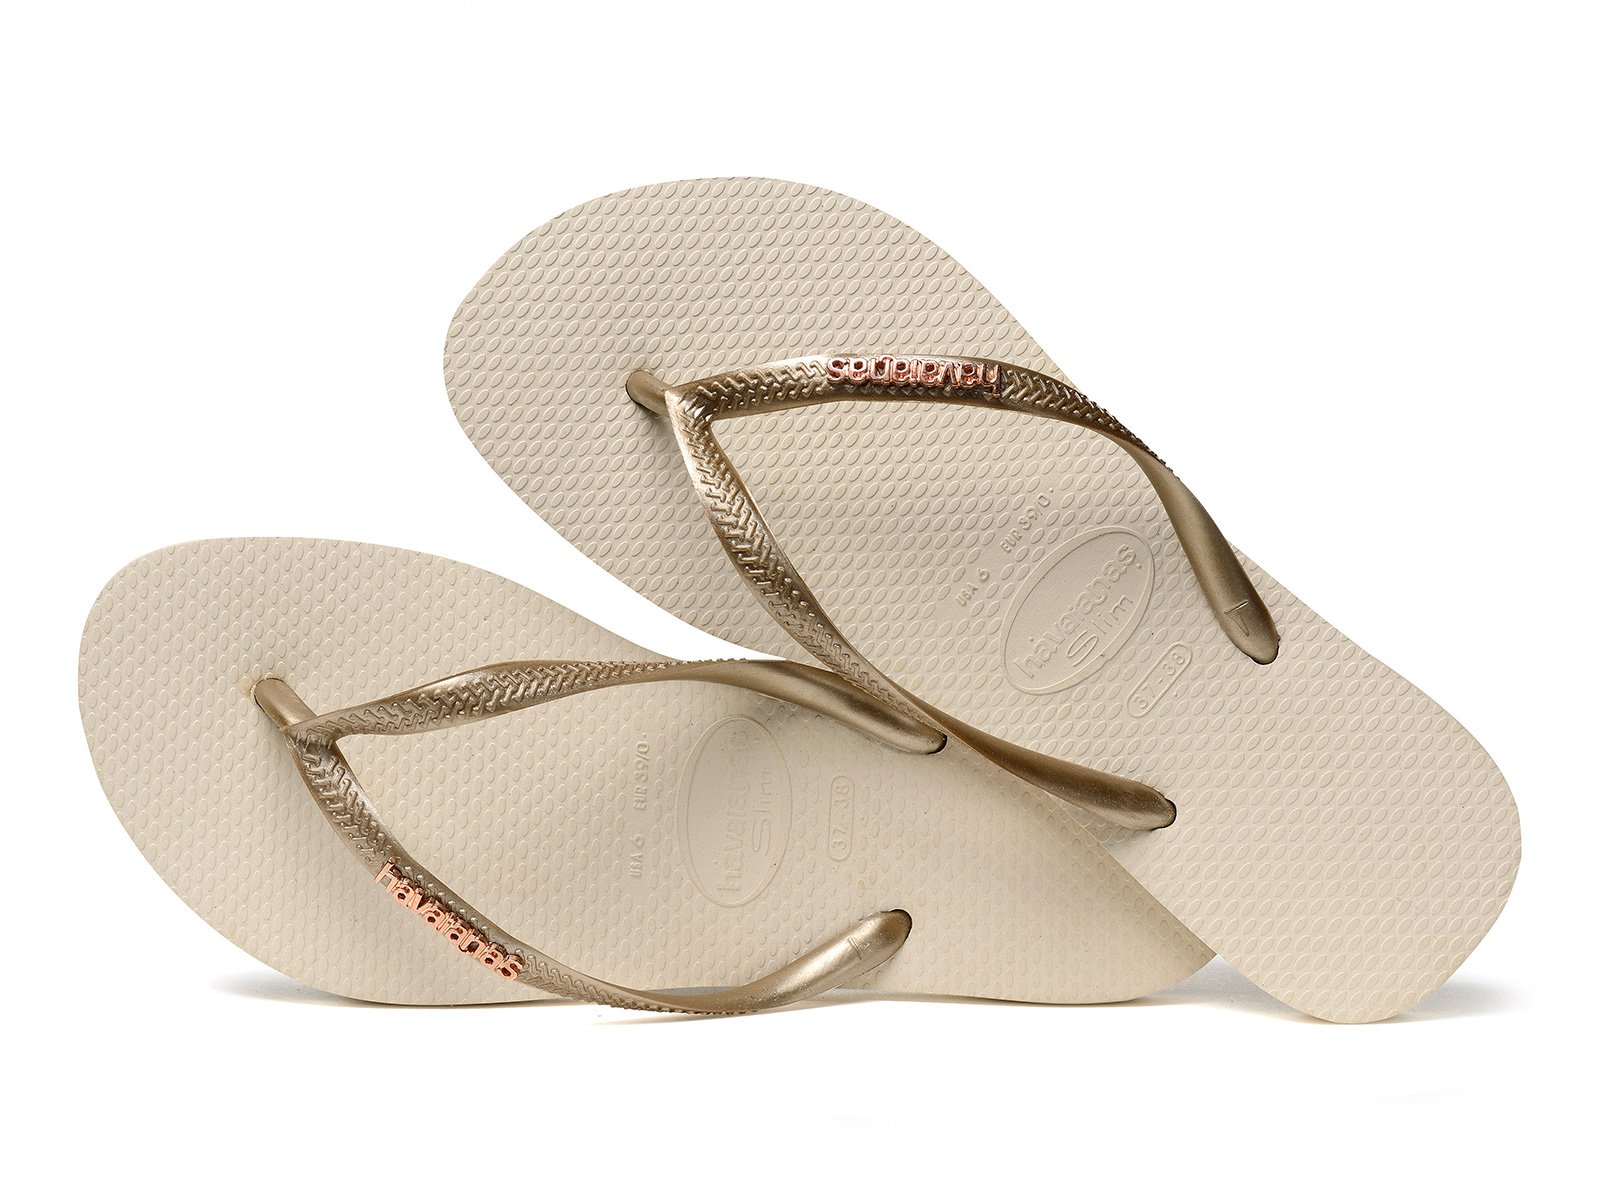 Beige Flip-flops And Gold Straps With The Havaianas Logo - Slim Logo ...